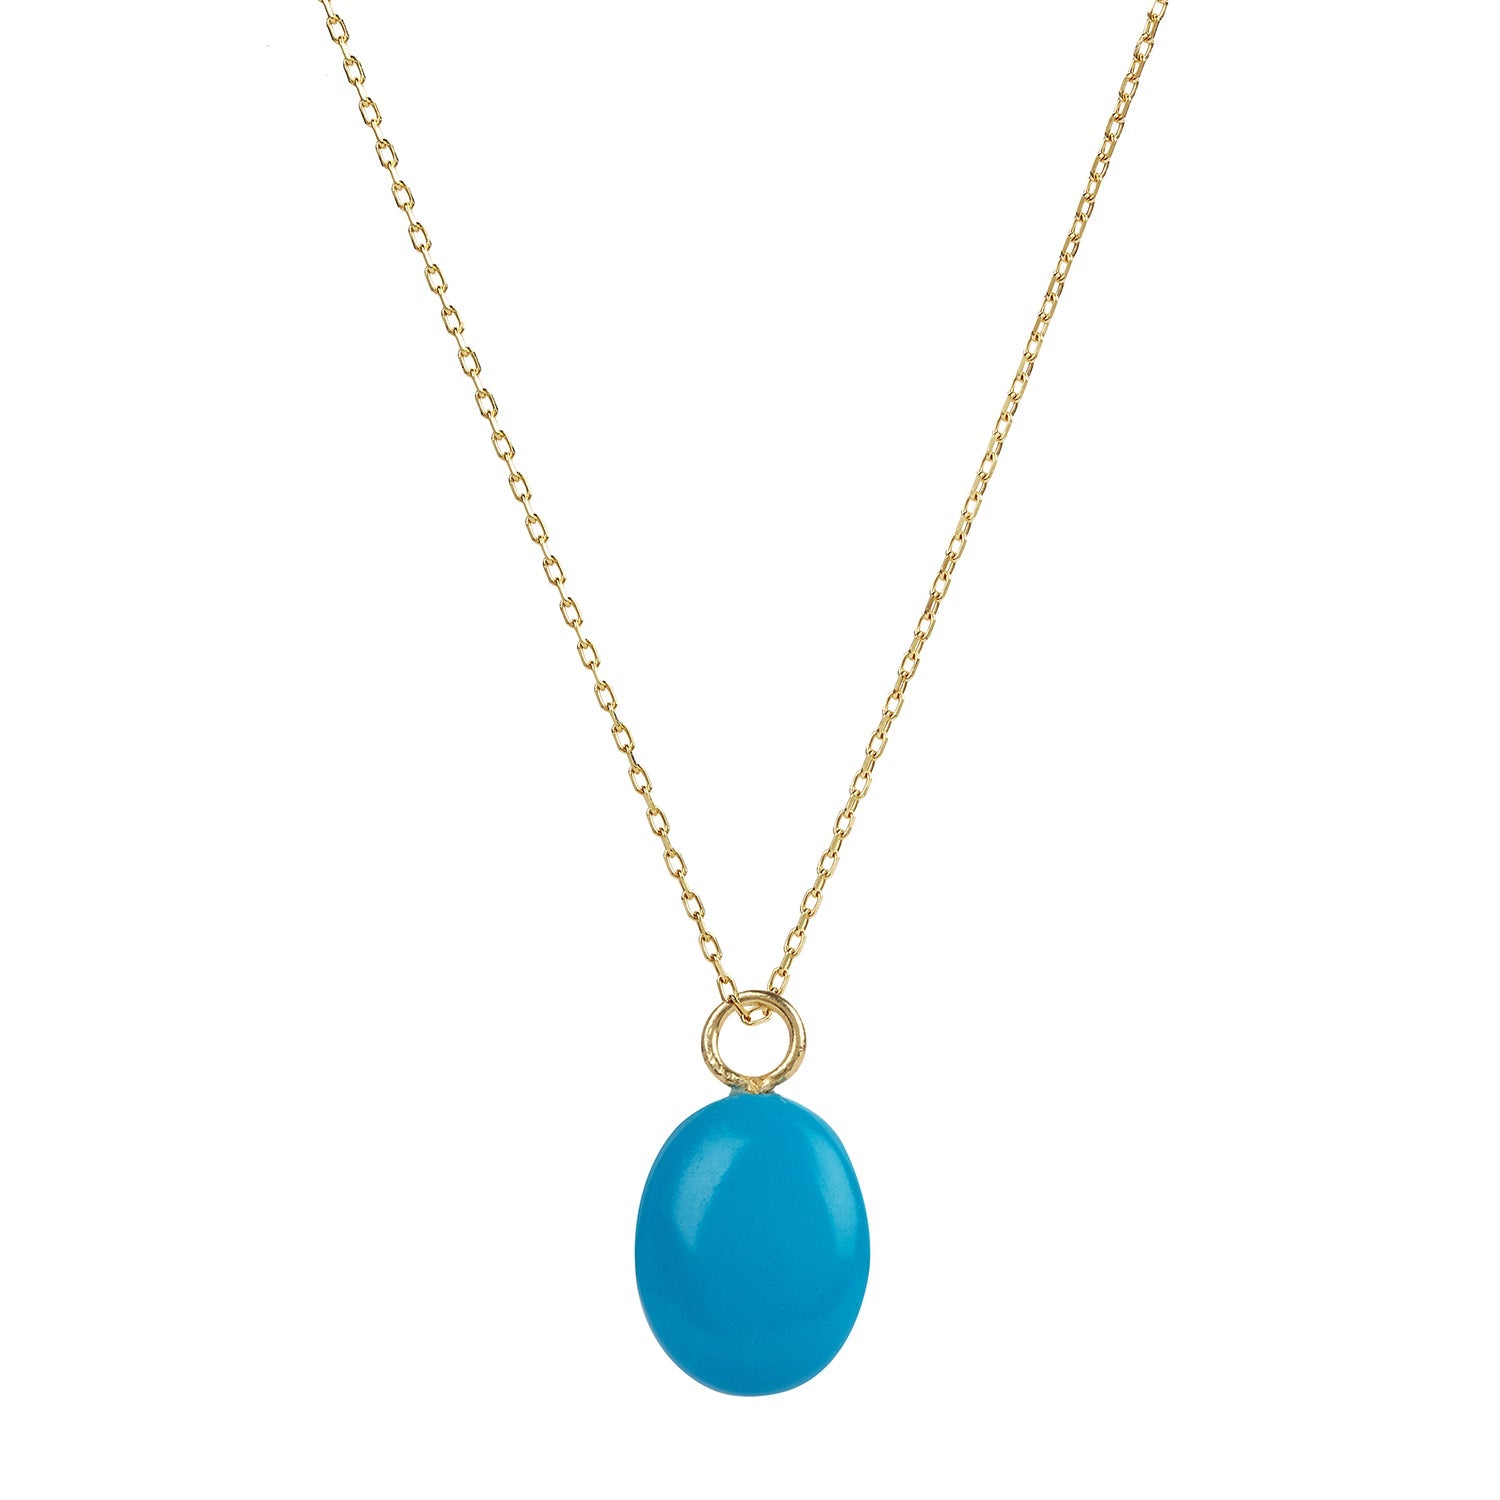 Eden Gold Chain Necklace with Turquoise Pendant